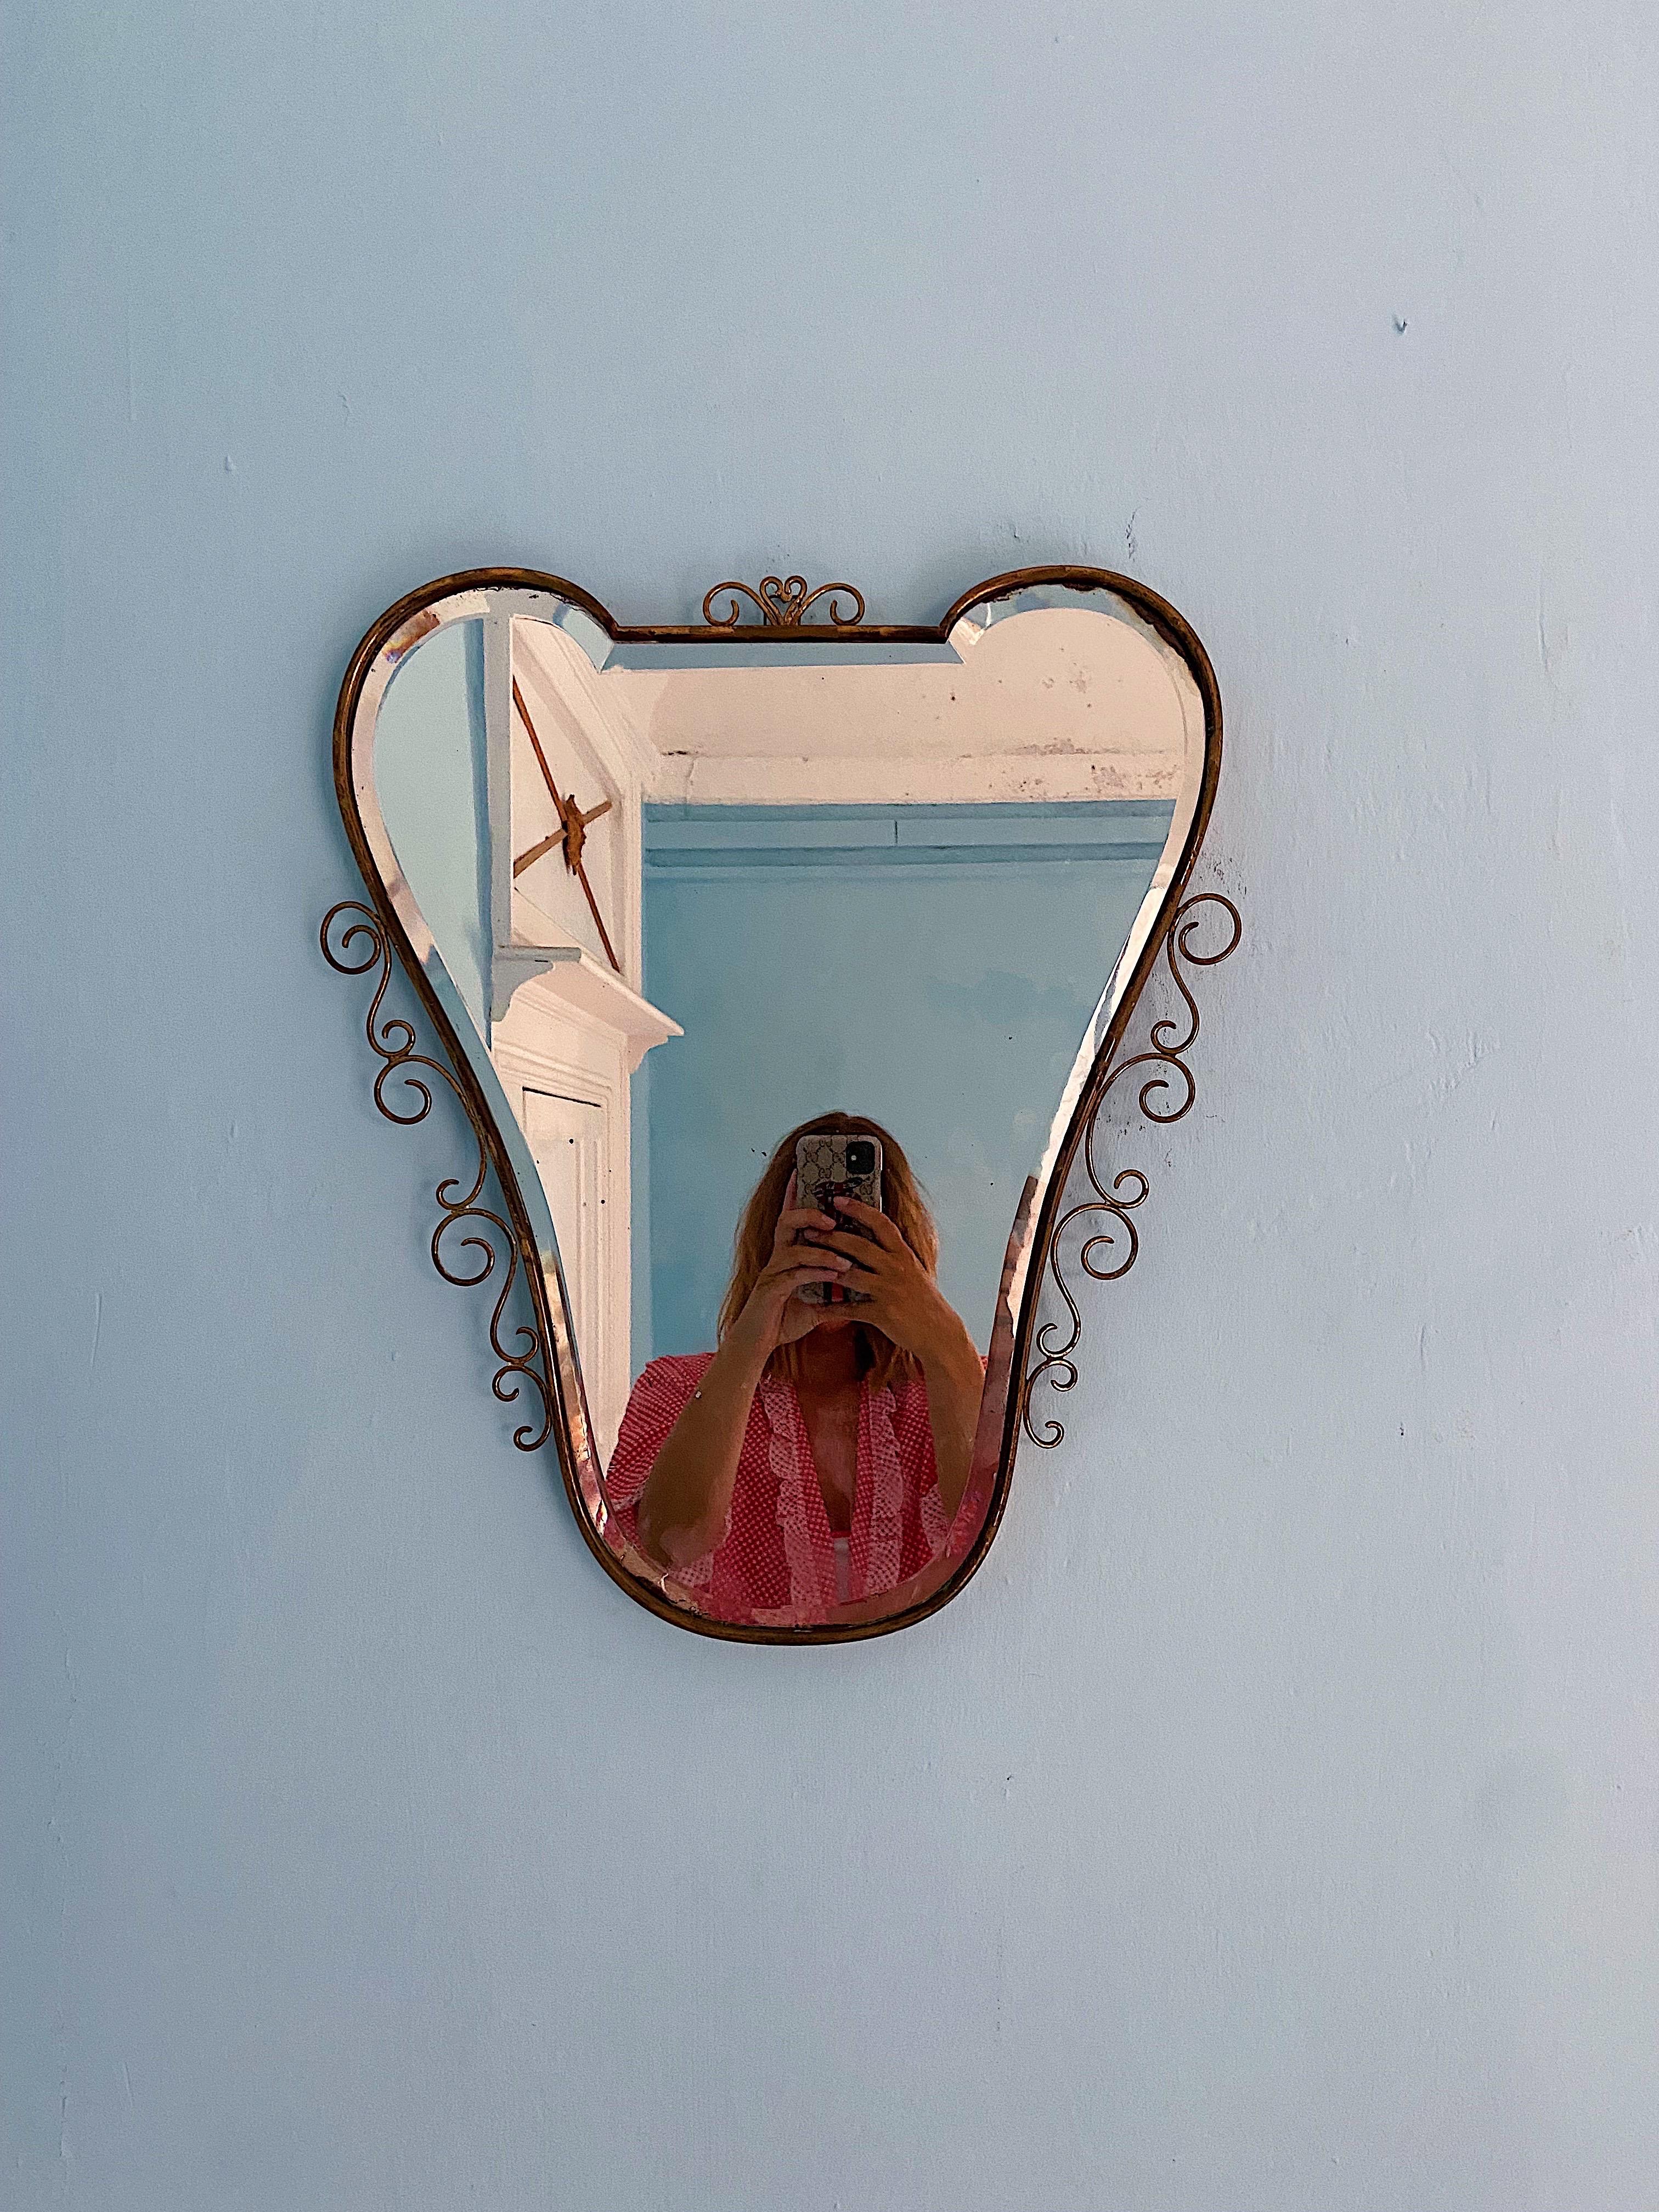 Mid-Century Italian wall mirror attributed to Gio Ponti. Original unrestored mirror with brass frame (circa 1950s). Very elegant shape. The backside is in solid wood and retains original hook for hanging. You can shine the brass, but I have chosen